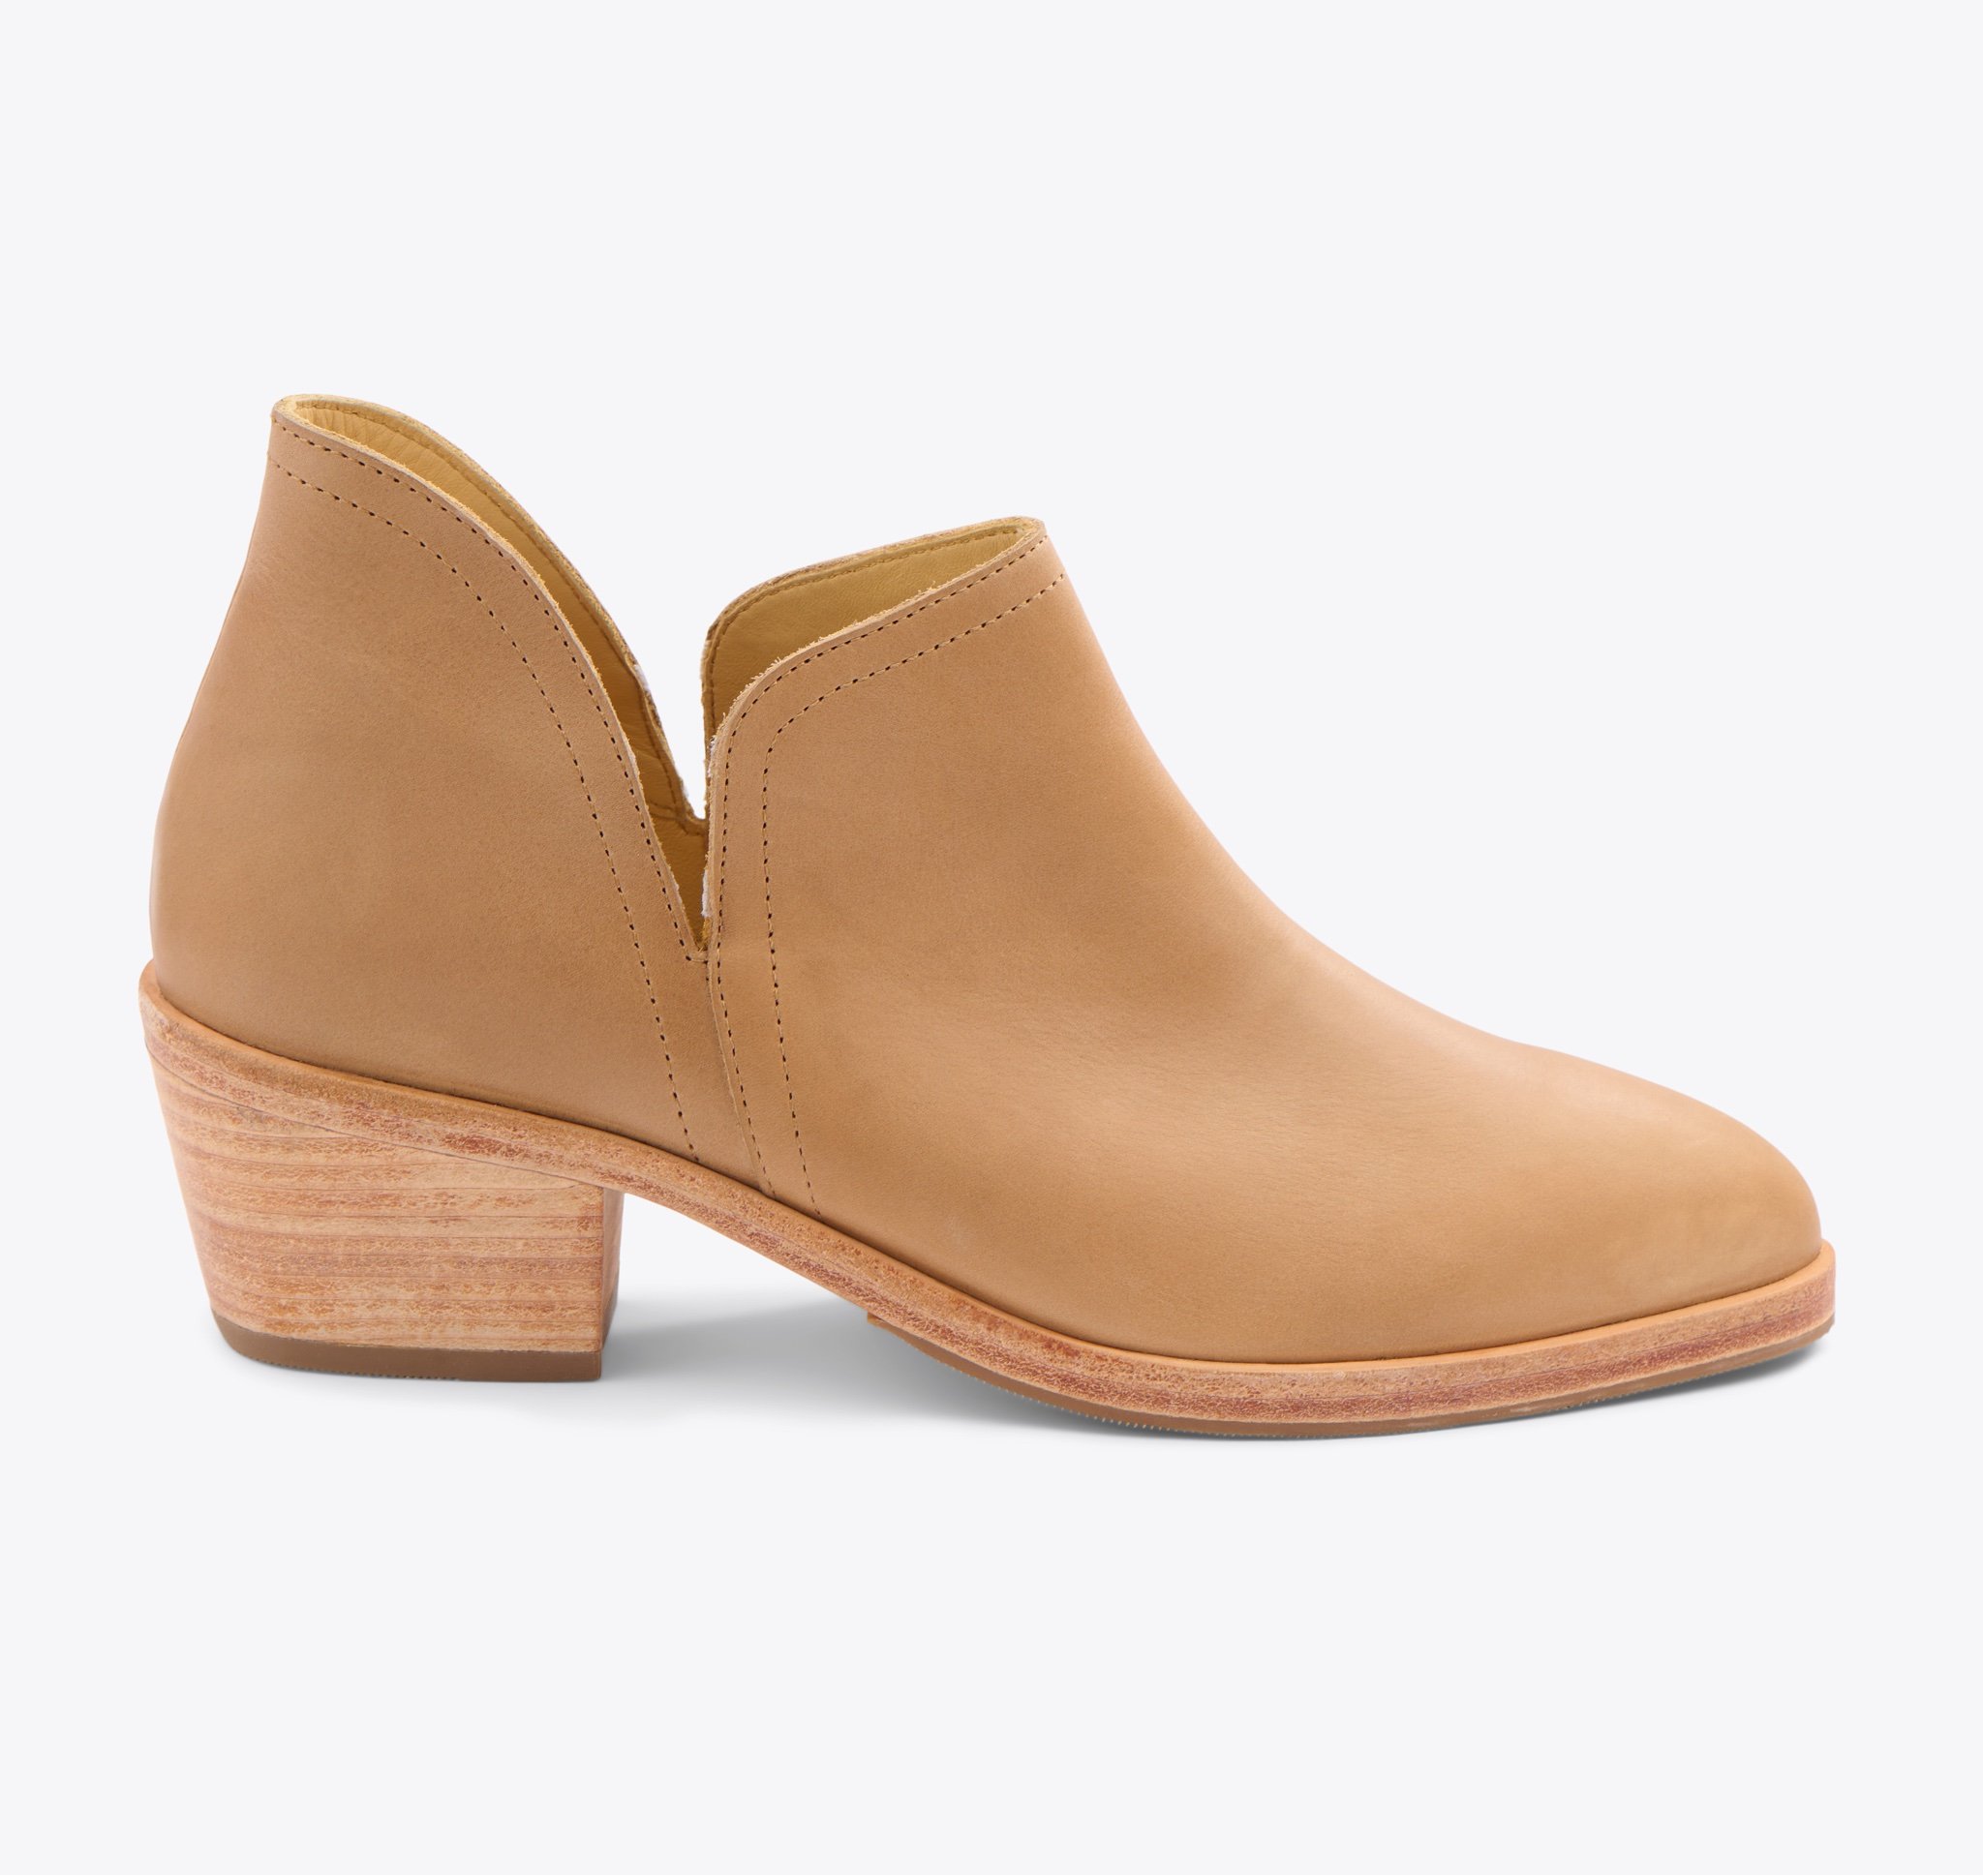 Nisolo Everyday Ankle Bootie Almond - Every Nisolo product is built on the foundation of comfort, function, and design. 